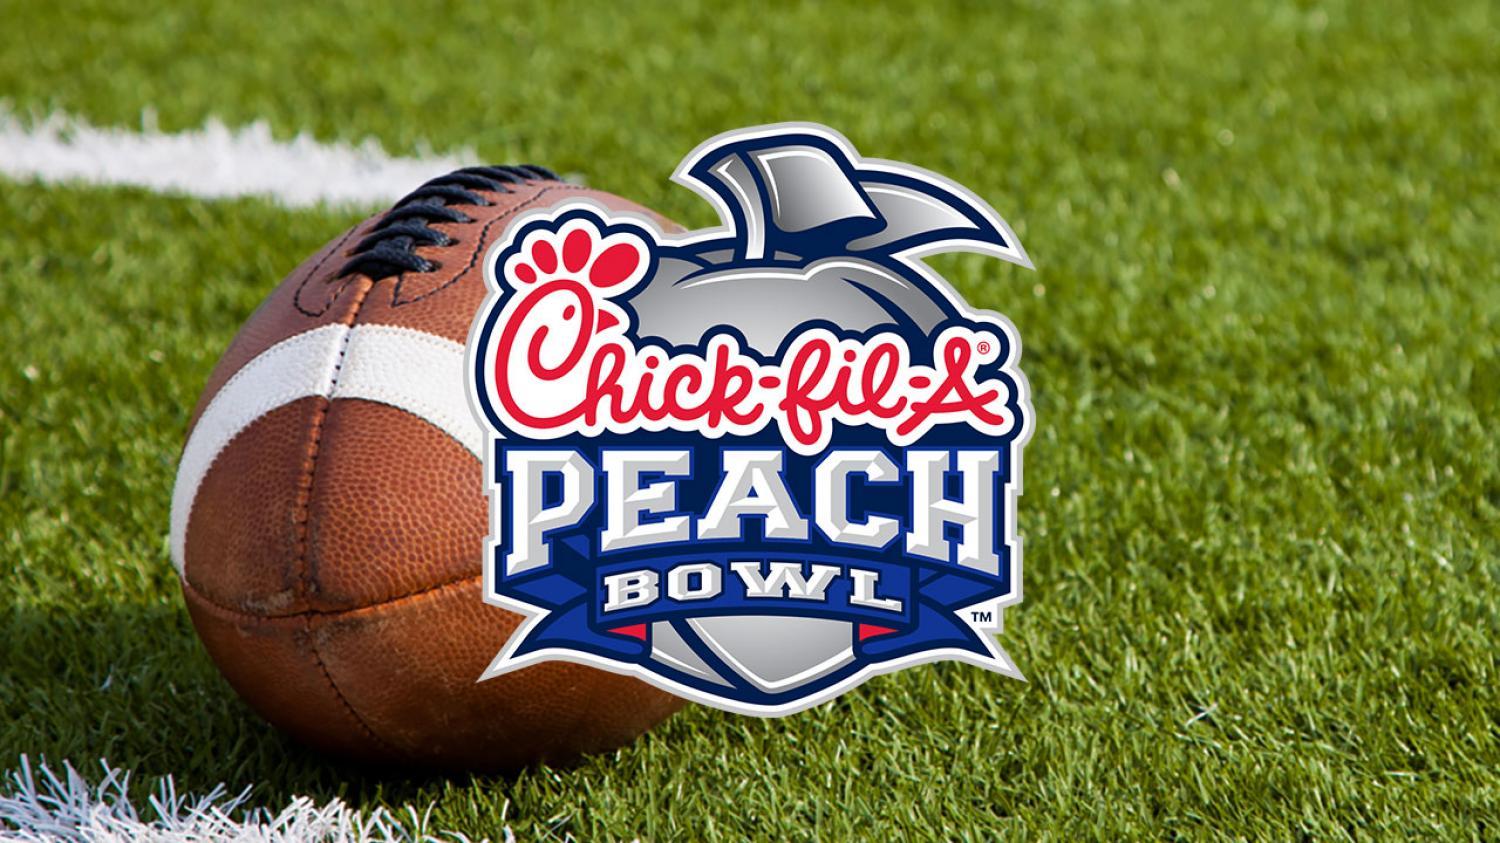 Chick-fil-A Peach Bowl: Pittsburgh Panthers vs. Michigan State Spartans